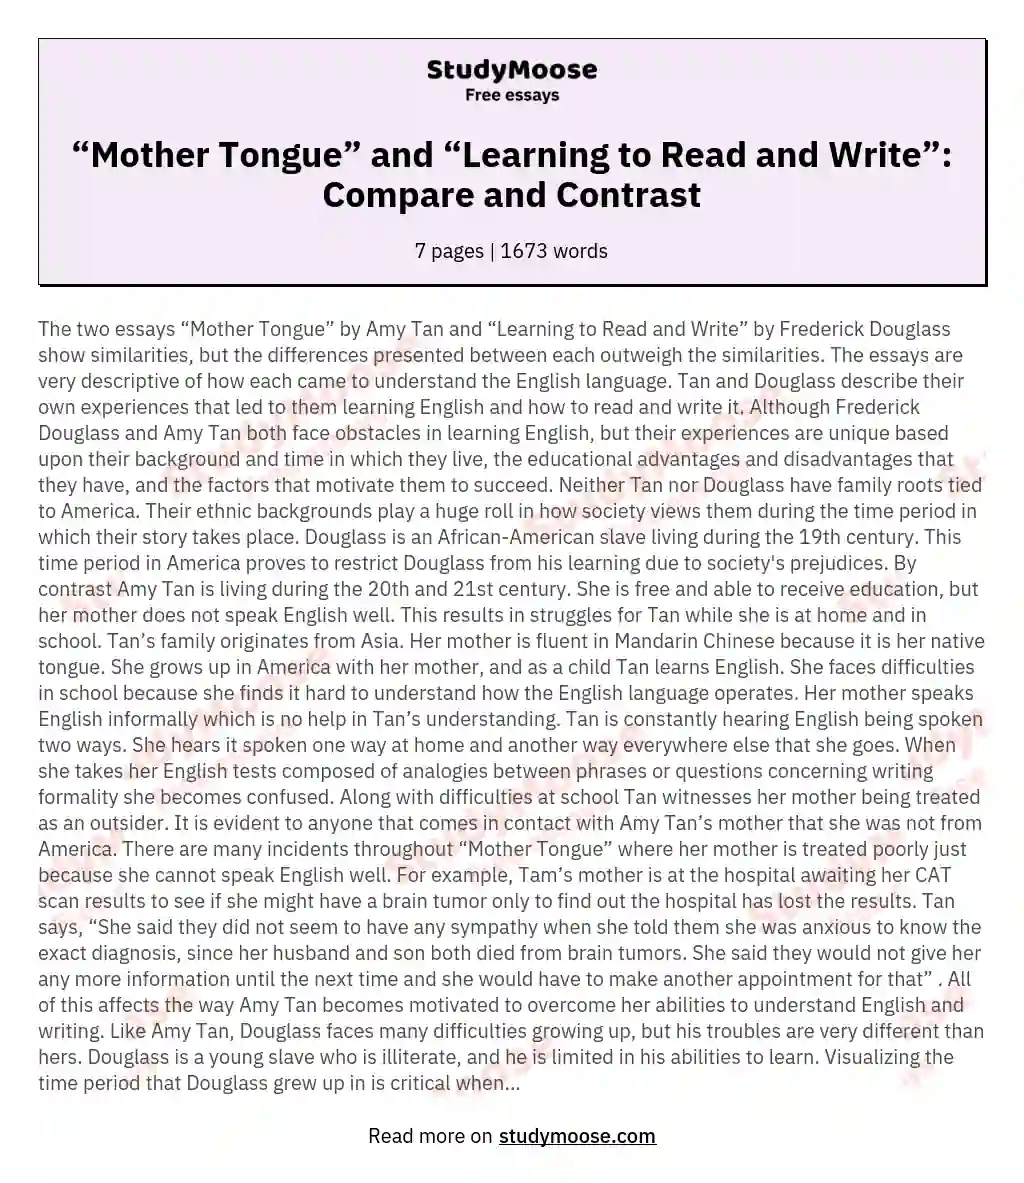 “Mother Tongue” and “Learning to Read and Write”: Compare and Contrast essay